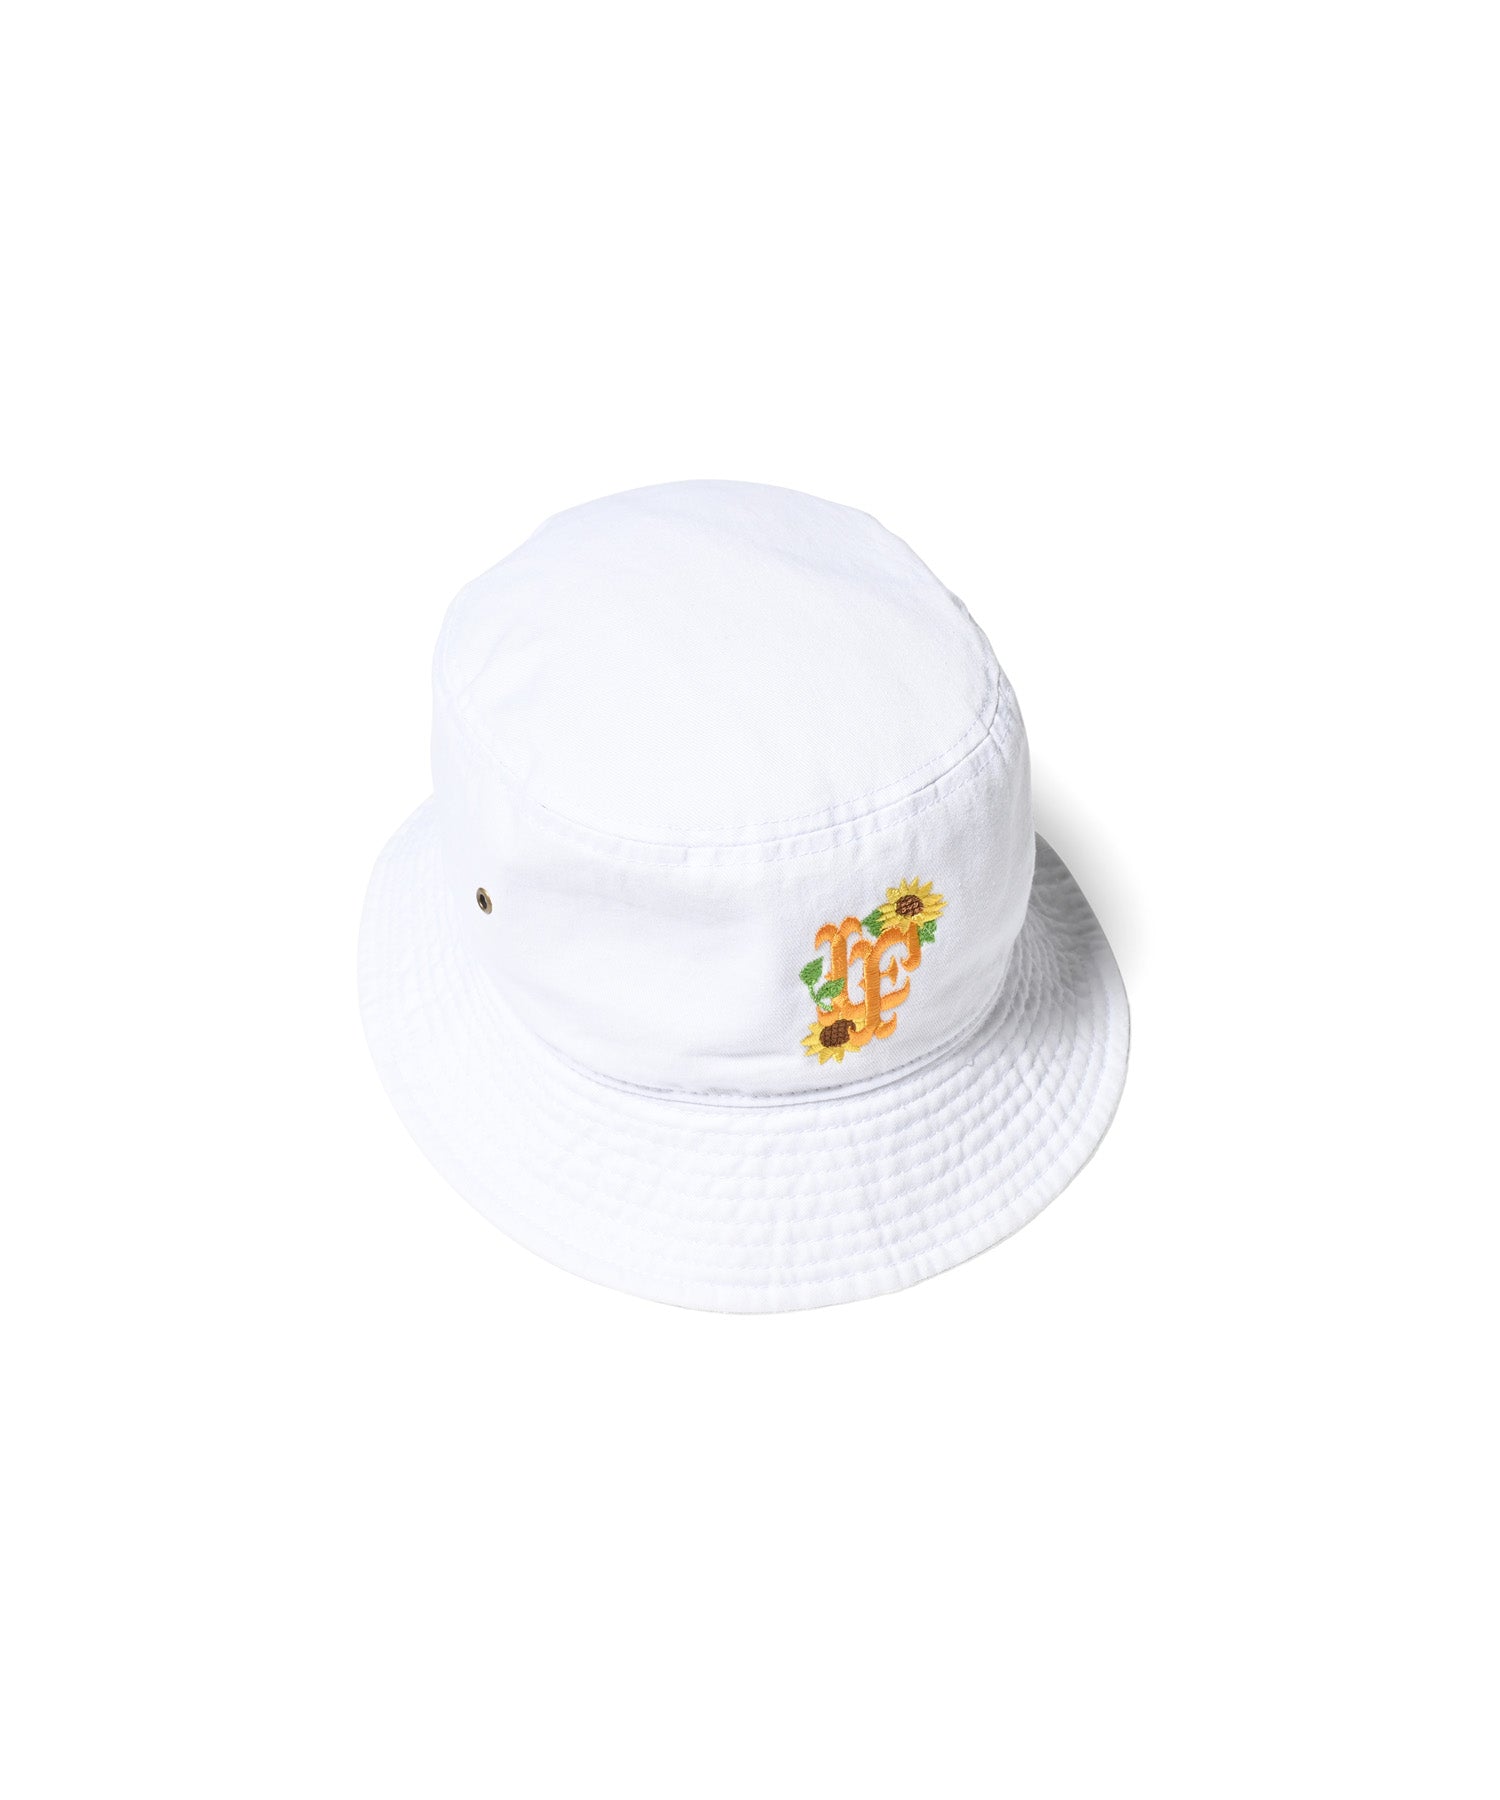 LFYT SUNFLOWER LF LOGO BUCKET HAT "directed by YUUMI" LE231404